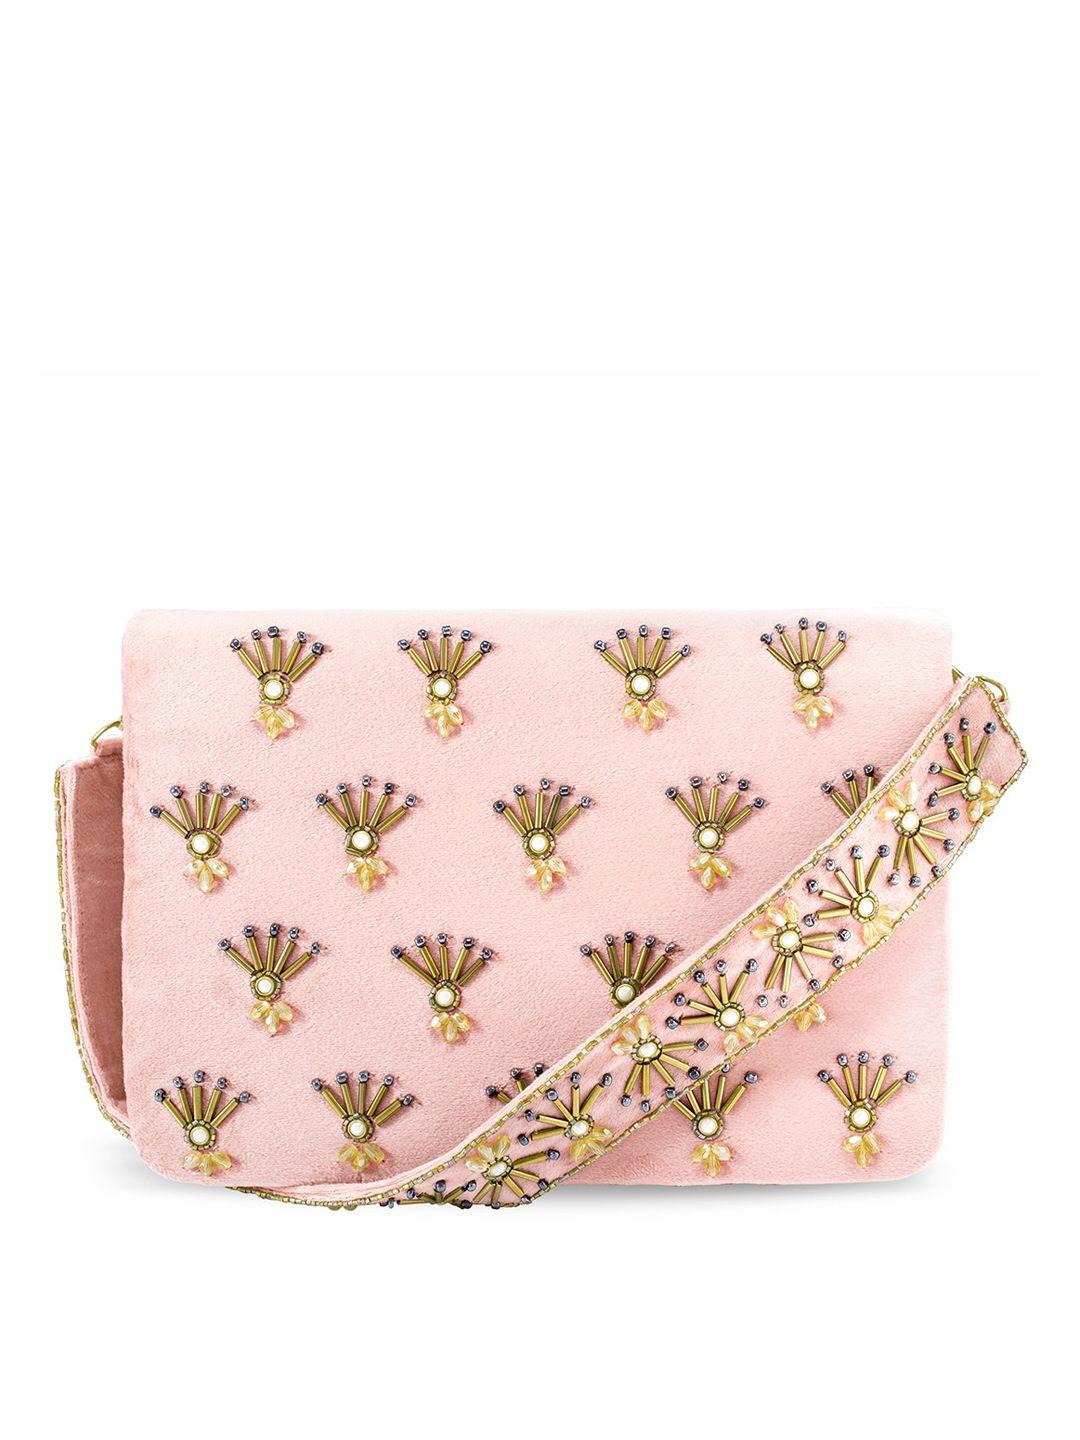 peora-peach-coloured-&-gold-toned-embroidered-purse-clutch